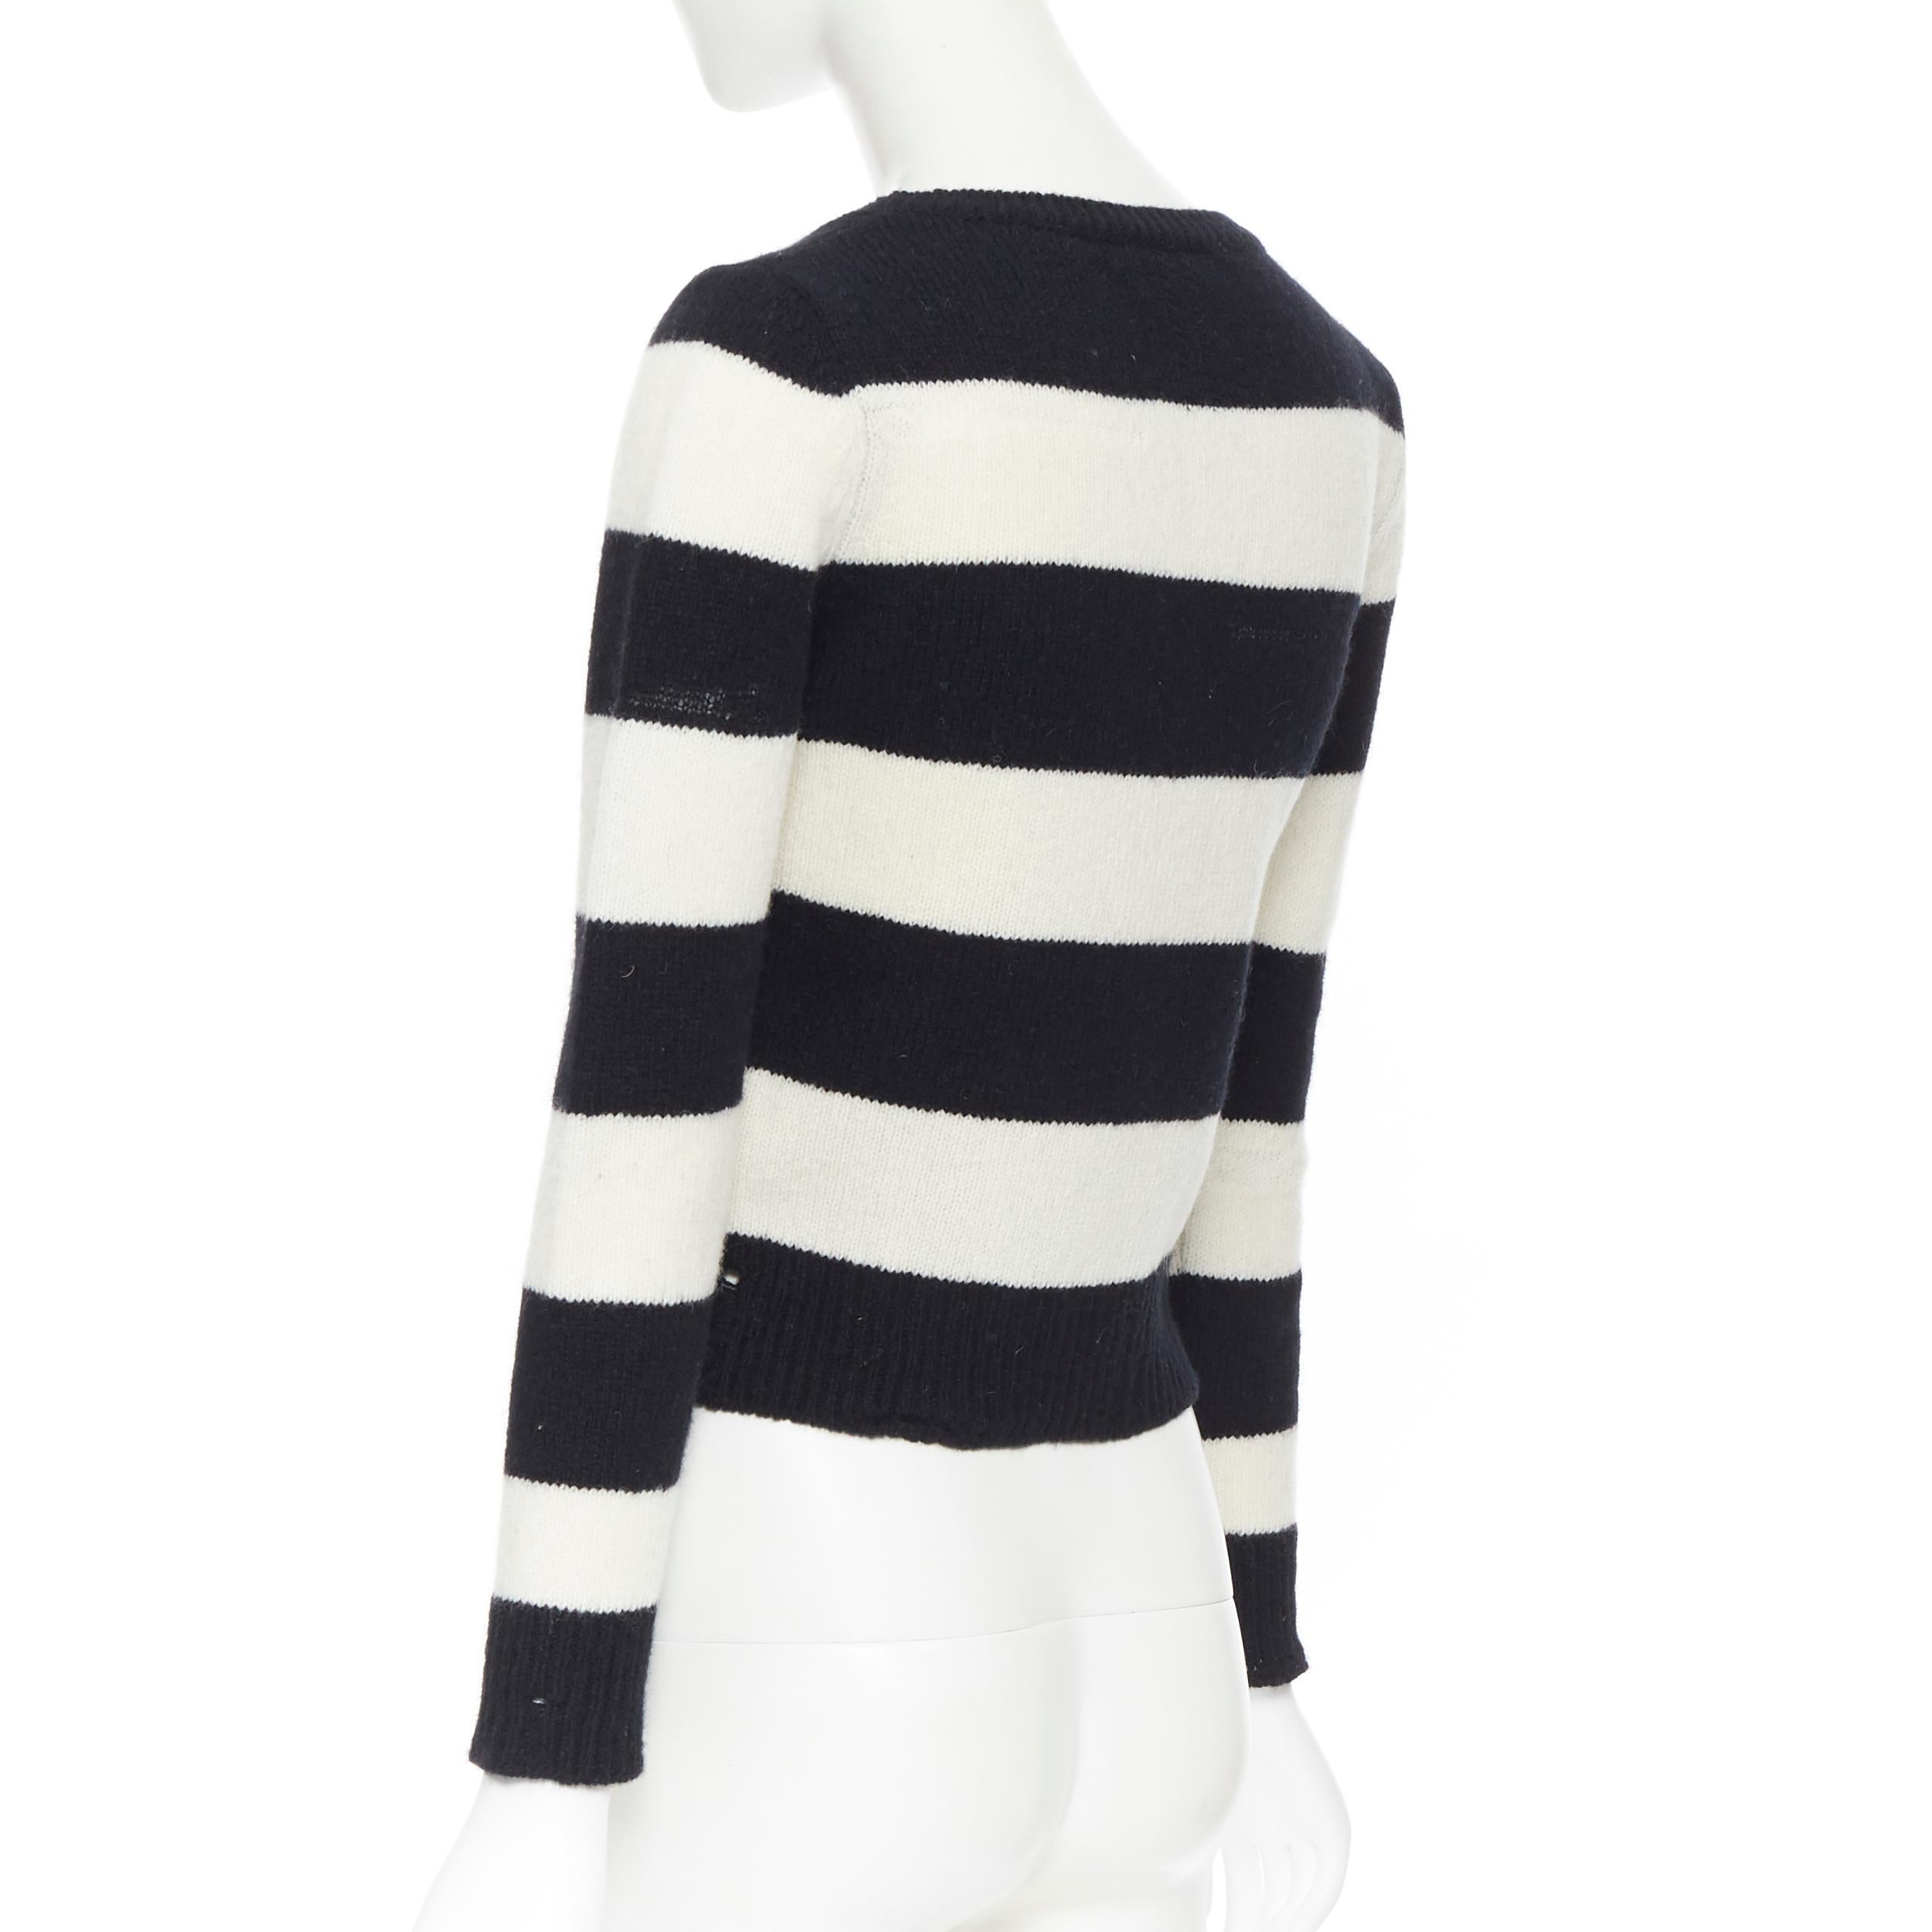 Women's SAINT LAURENT 2015 black white striped distressed holey knit sweater top XS